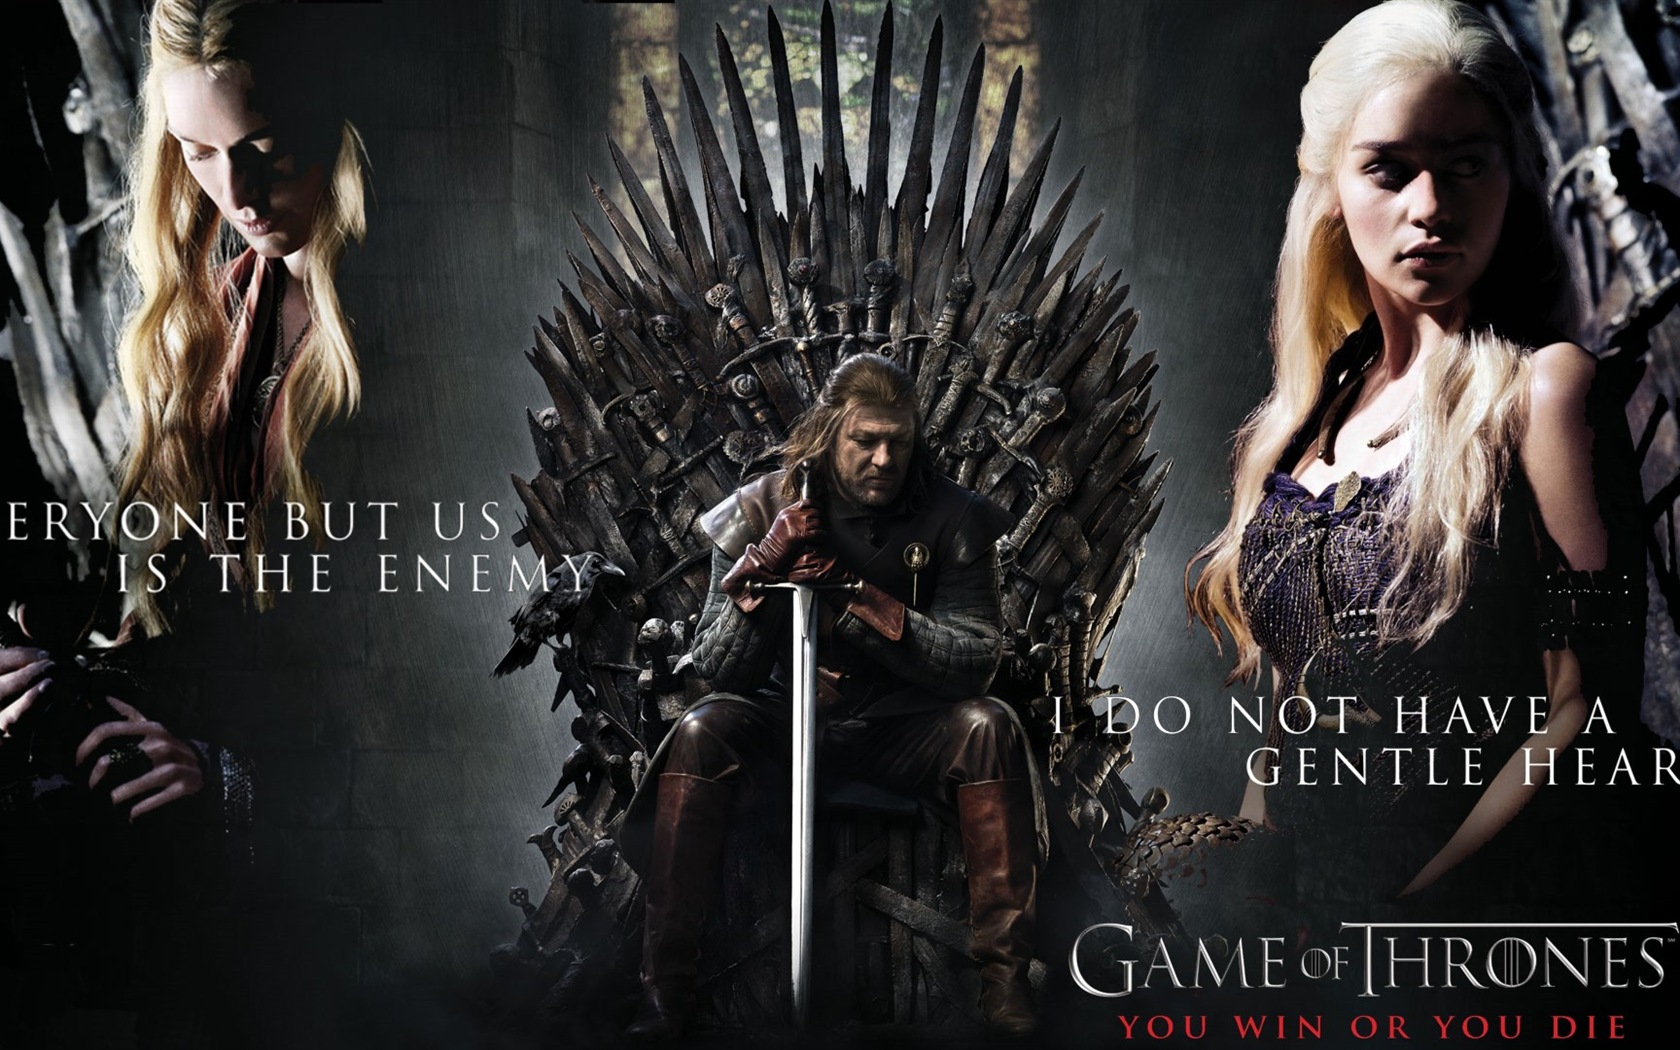 A Song of Ice and Fire: Game of Thrones 冰與火之歌：權力的遊戲高清壁紙 #9 - 1680x1050